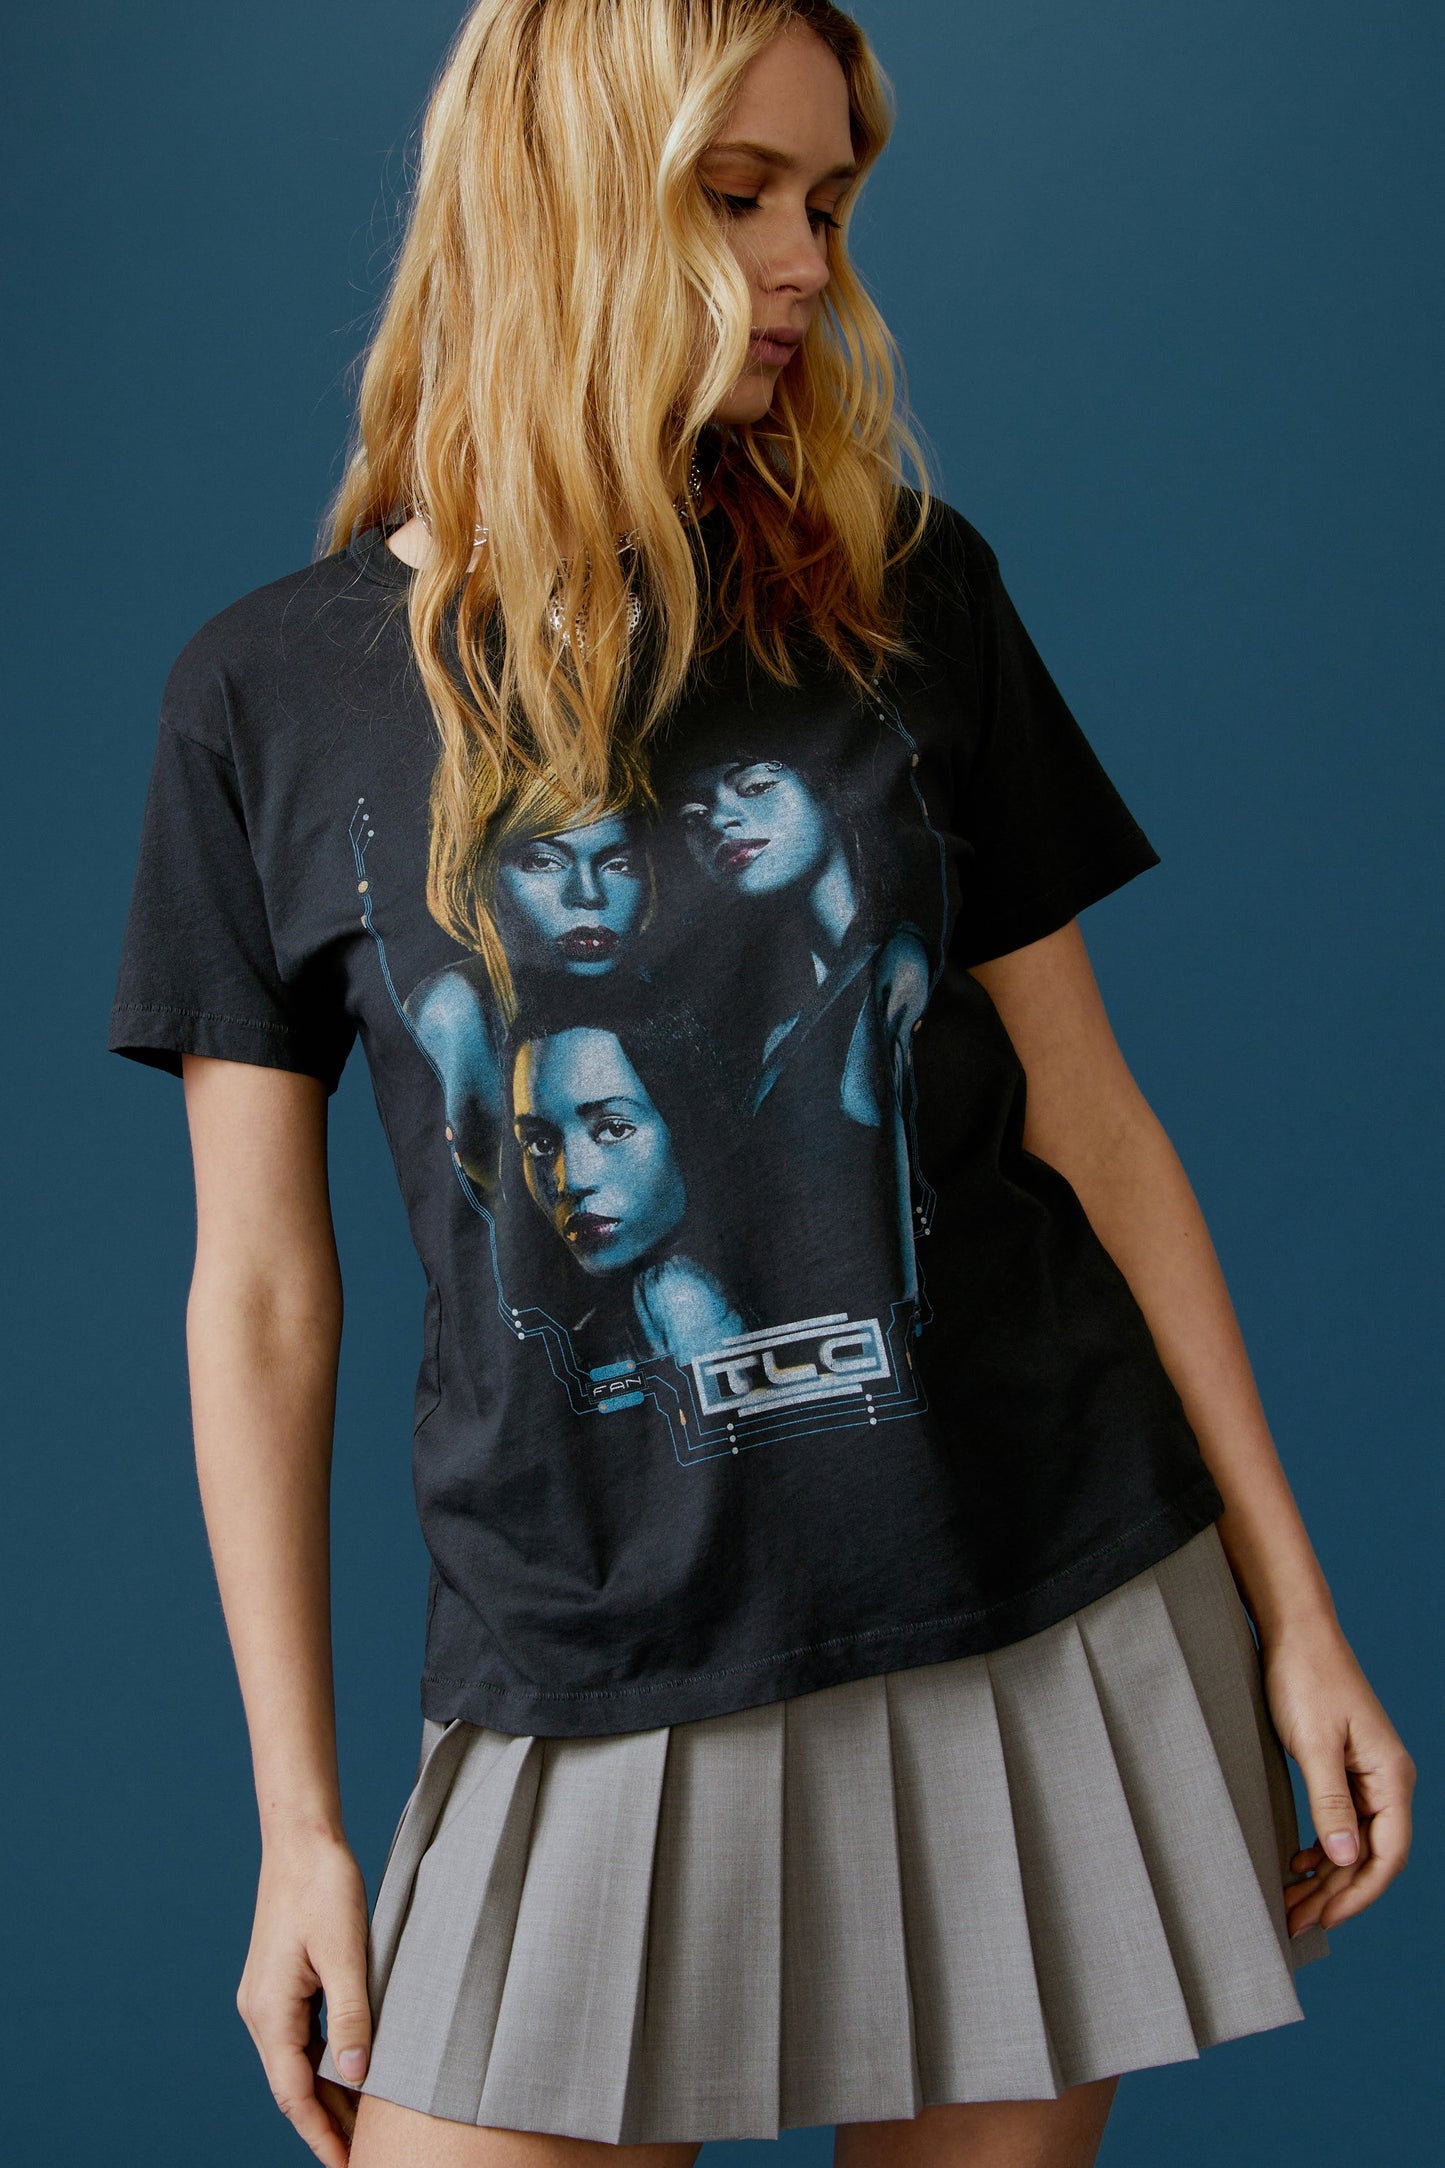 A blonde-haired model featuring a black tee designed with a portrait of each member of the group and stamped with 'TLC' at the back.